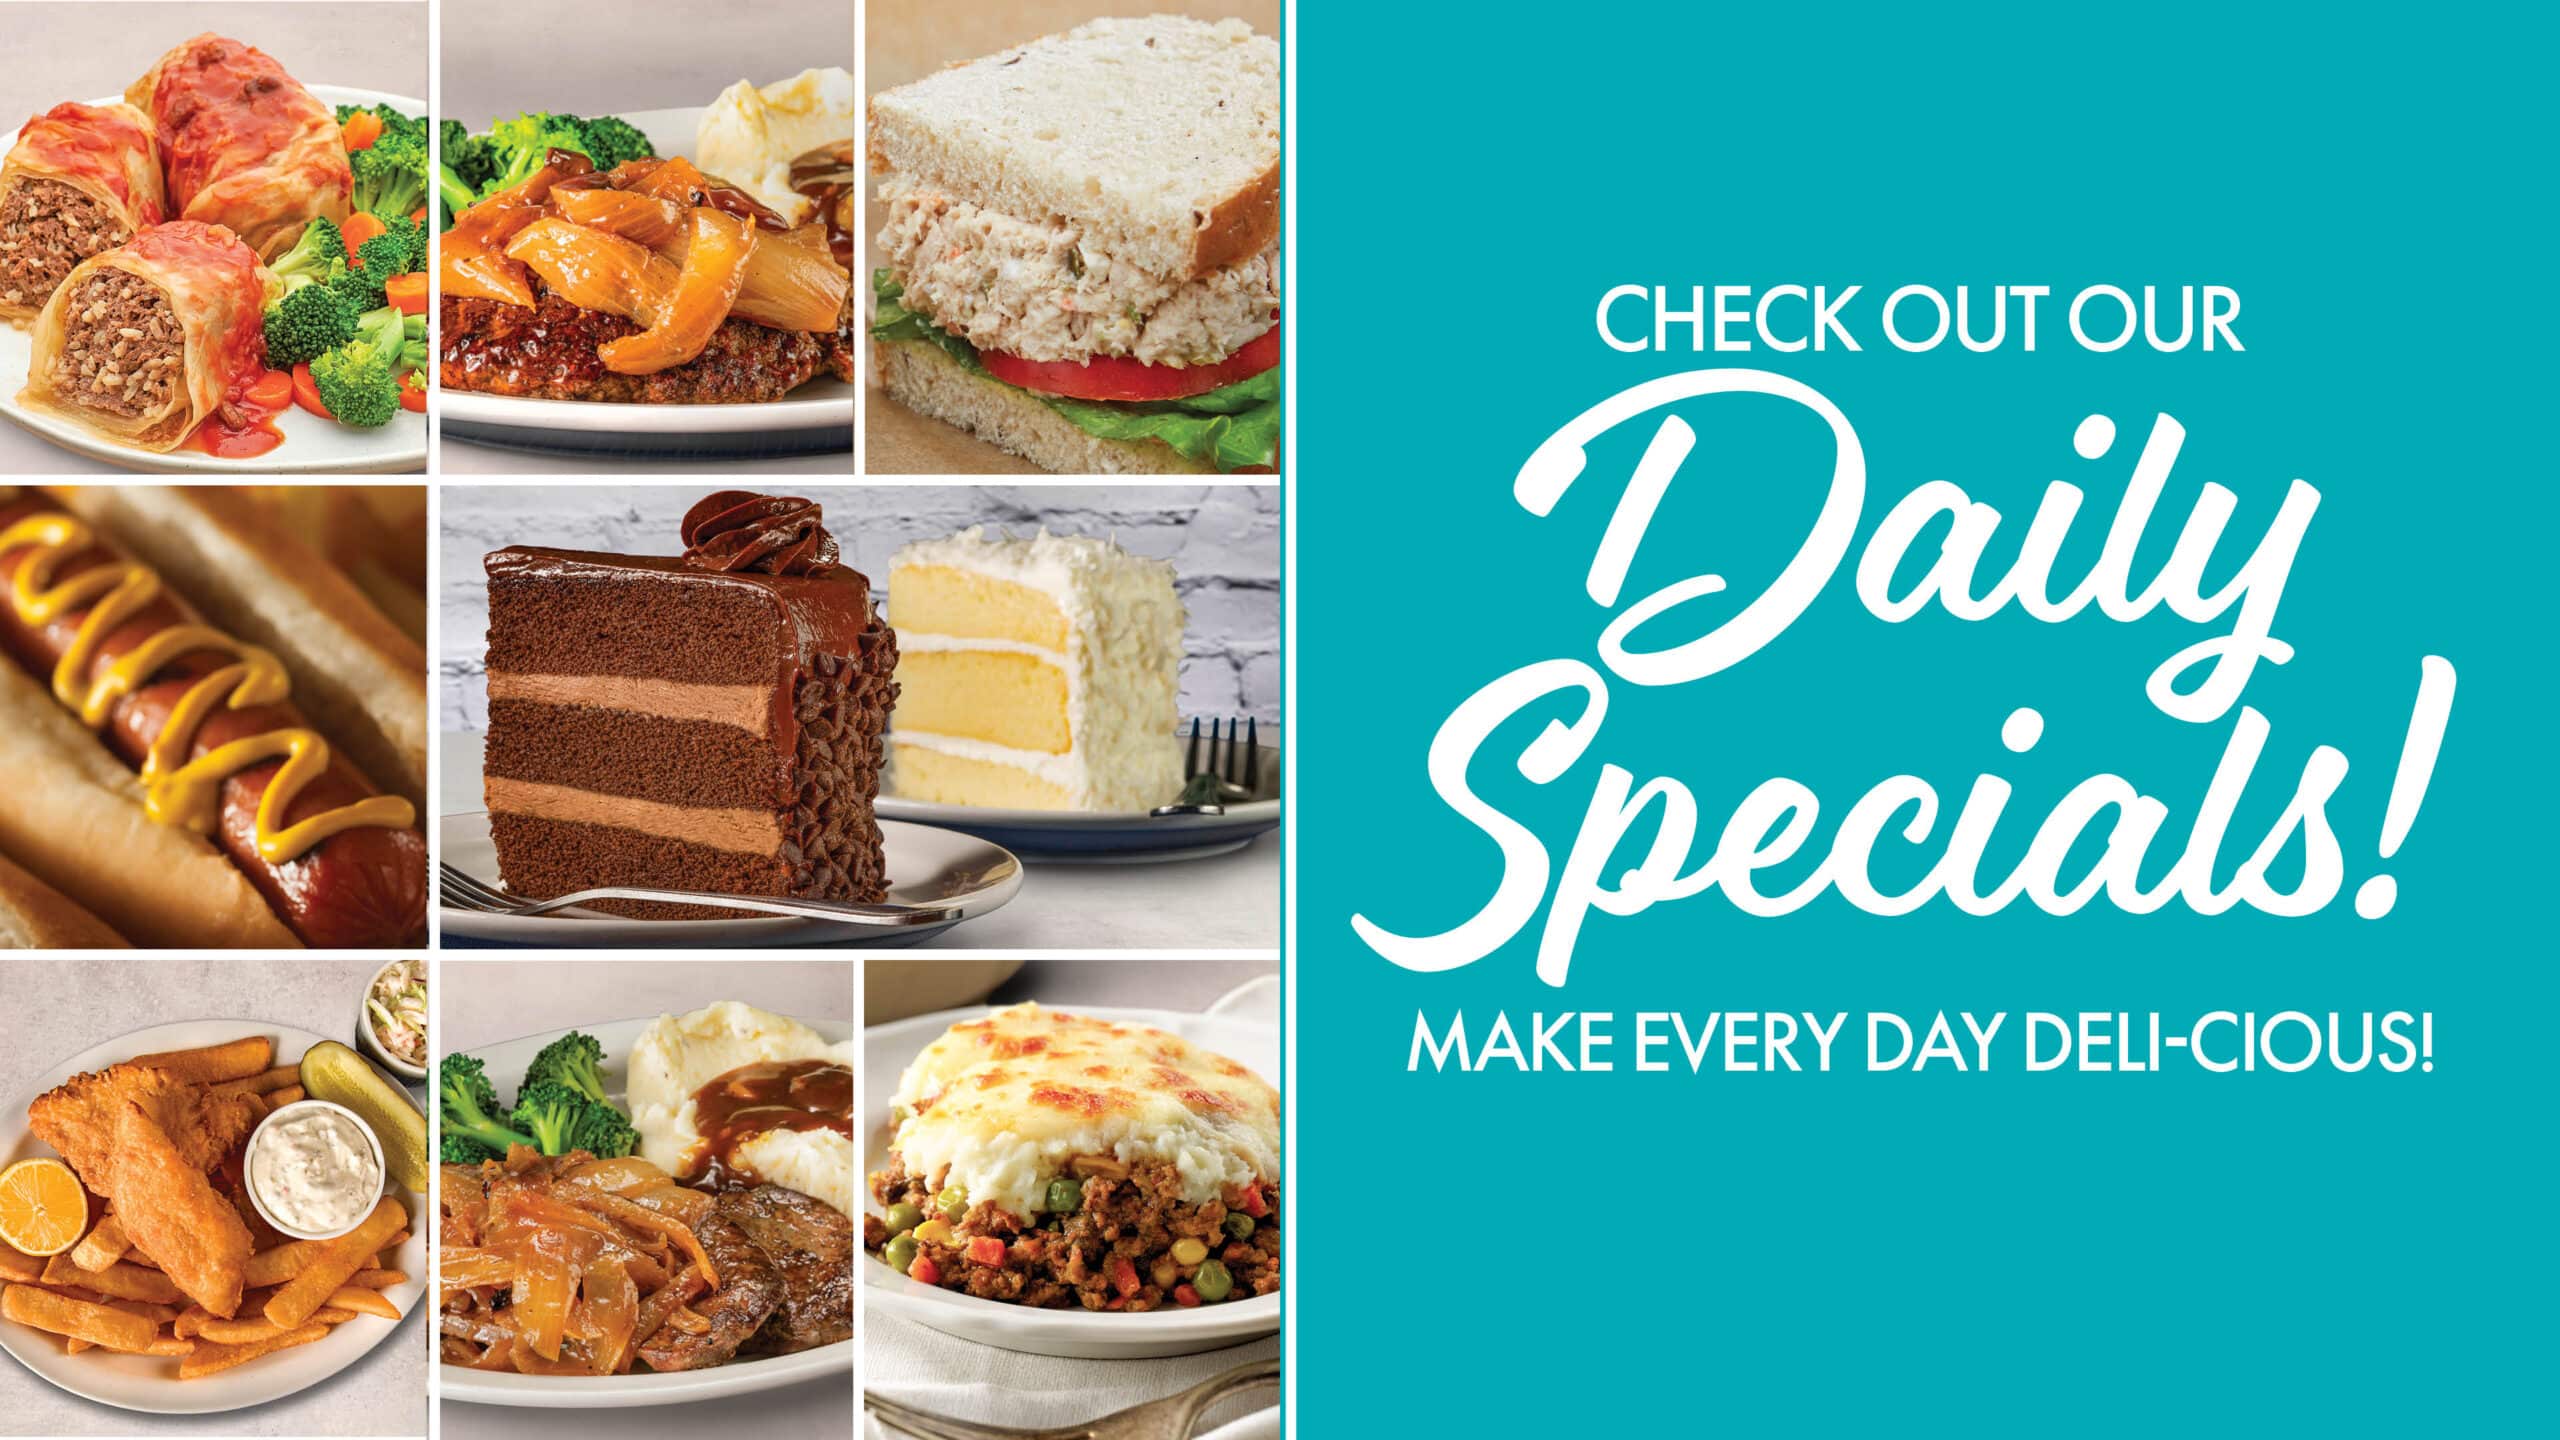 Check out our Daily Specials! Make every day Deli-cious!